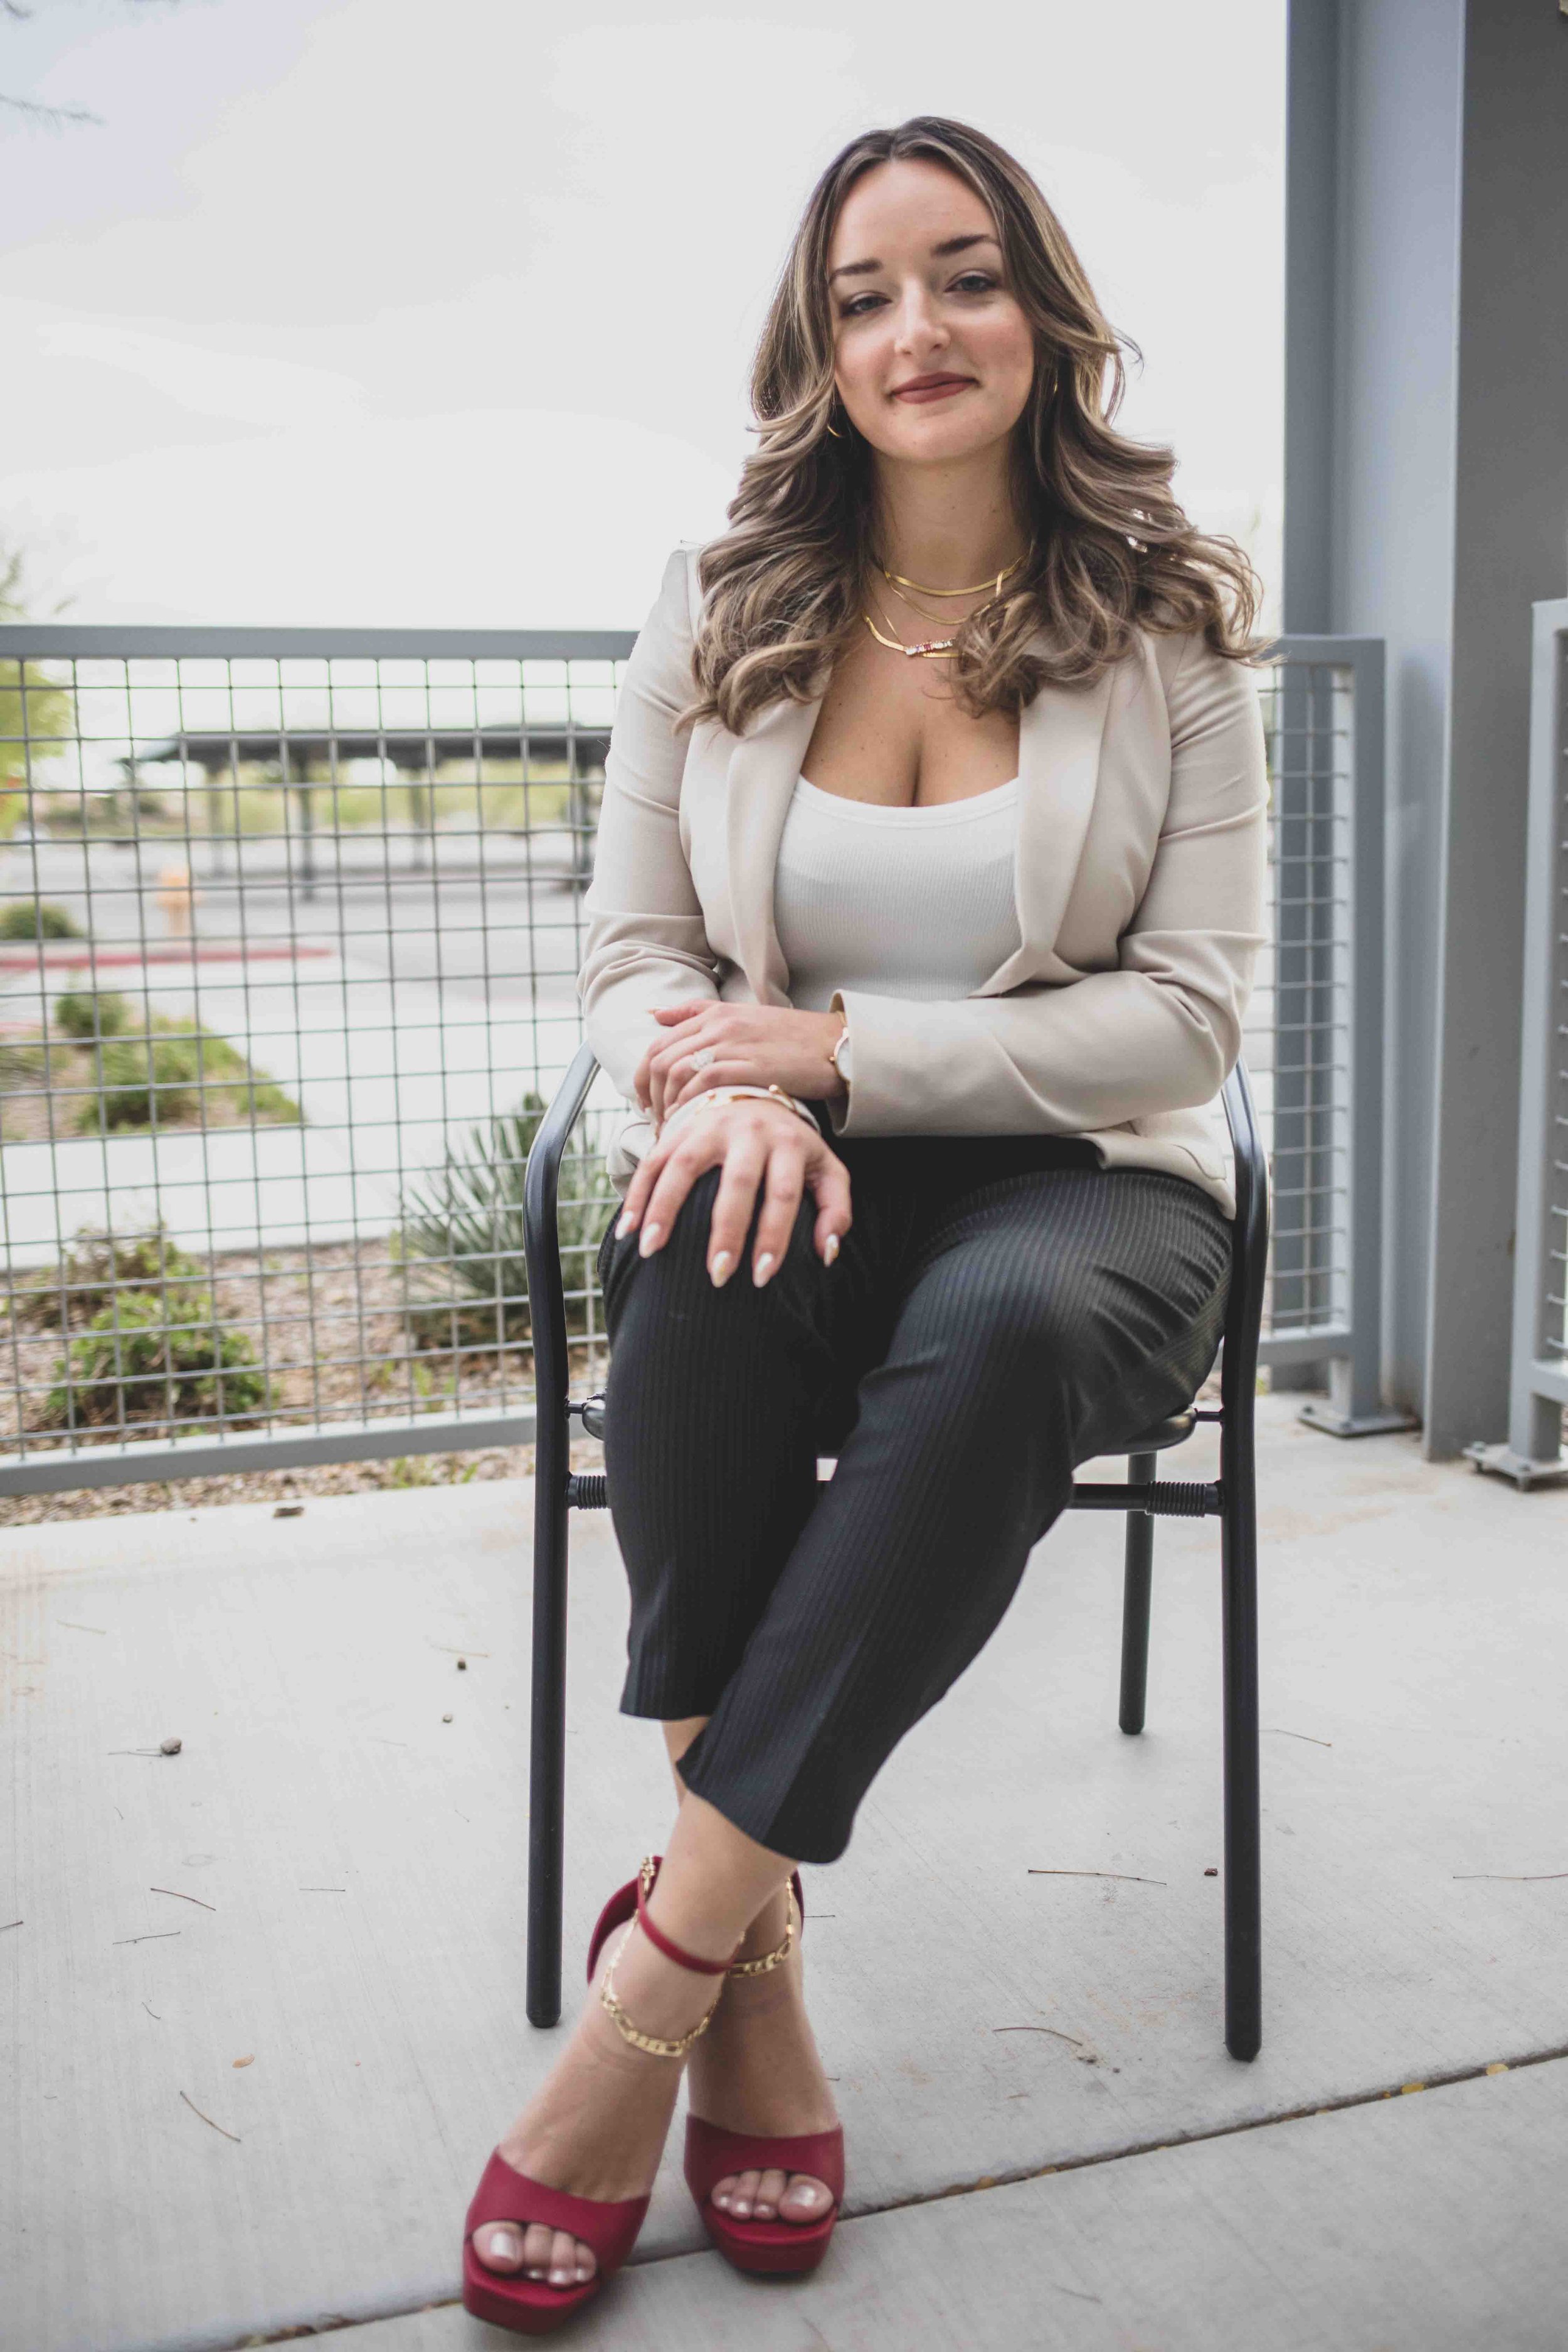 Naturopathic Doctor poses on a patio in front of office complex in Gilbert, Arizona by Gilbert Branding Photographer, Jennifer Lind Schutsky.